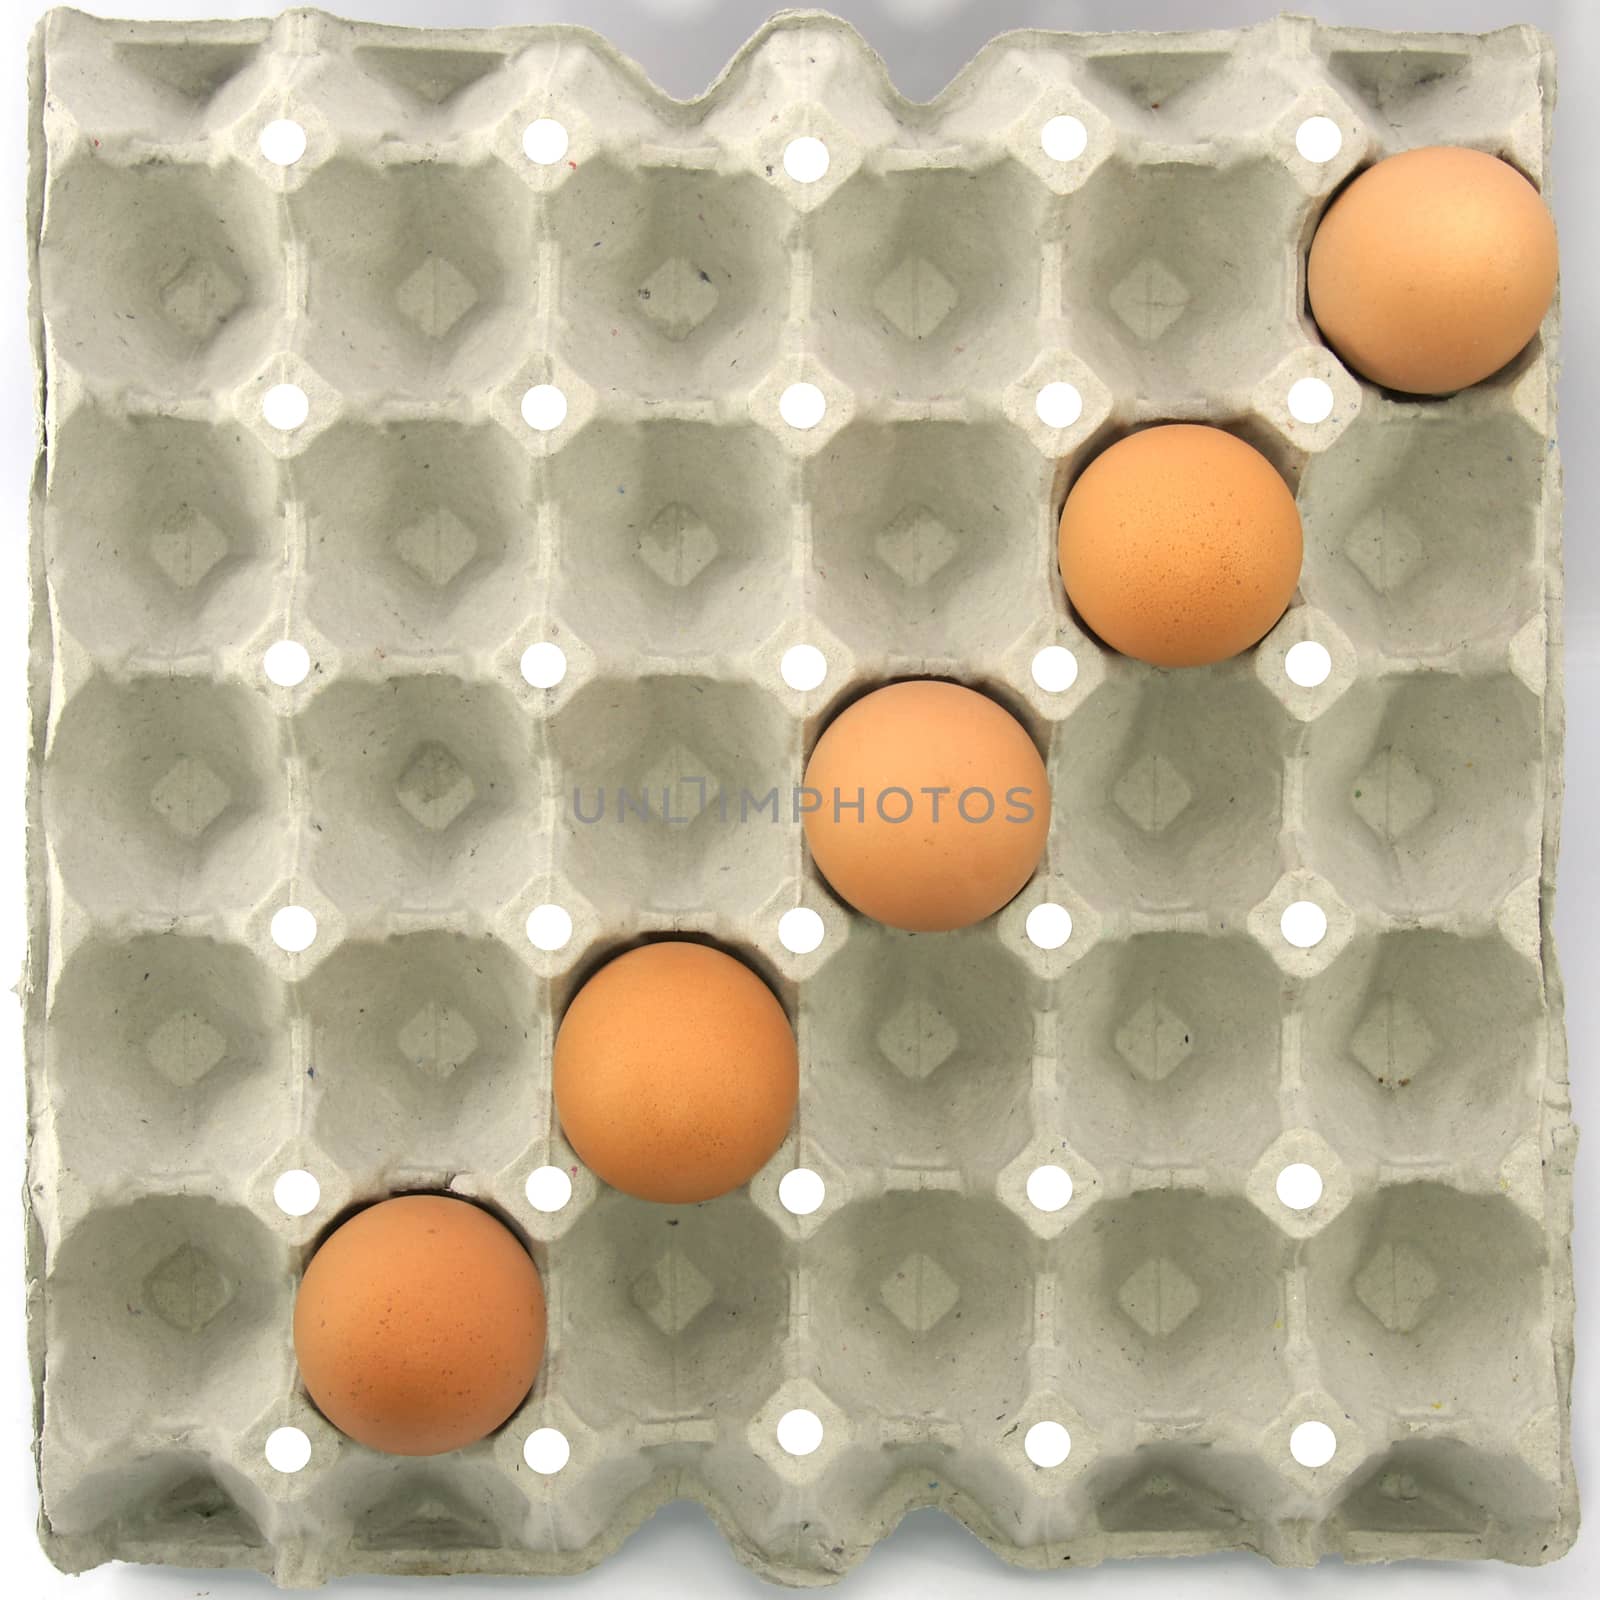 Divide symbol show by eggs in paper tray by mranucha